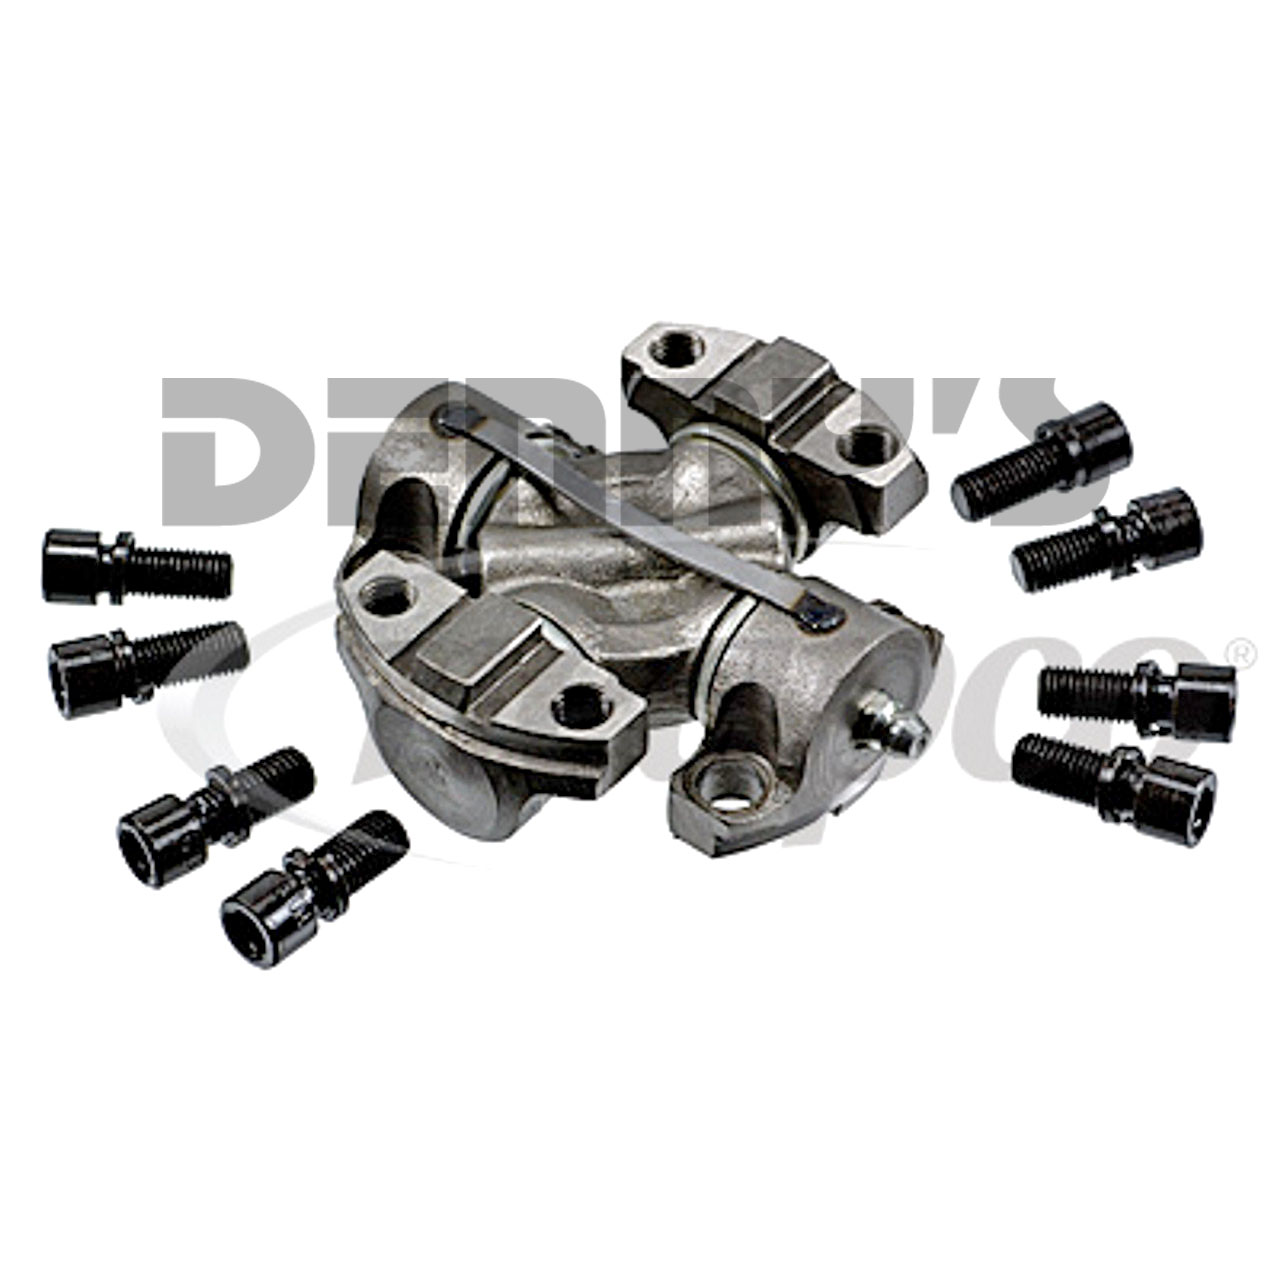 2C series wing bearing universal joints at Denny's Driveshafts